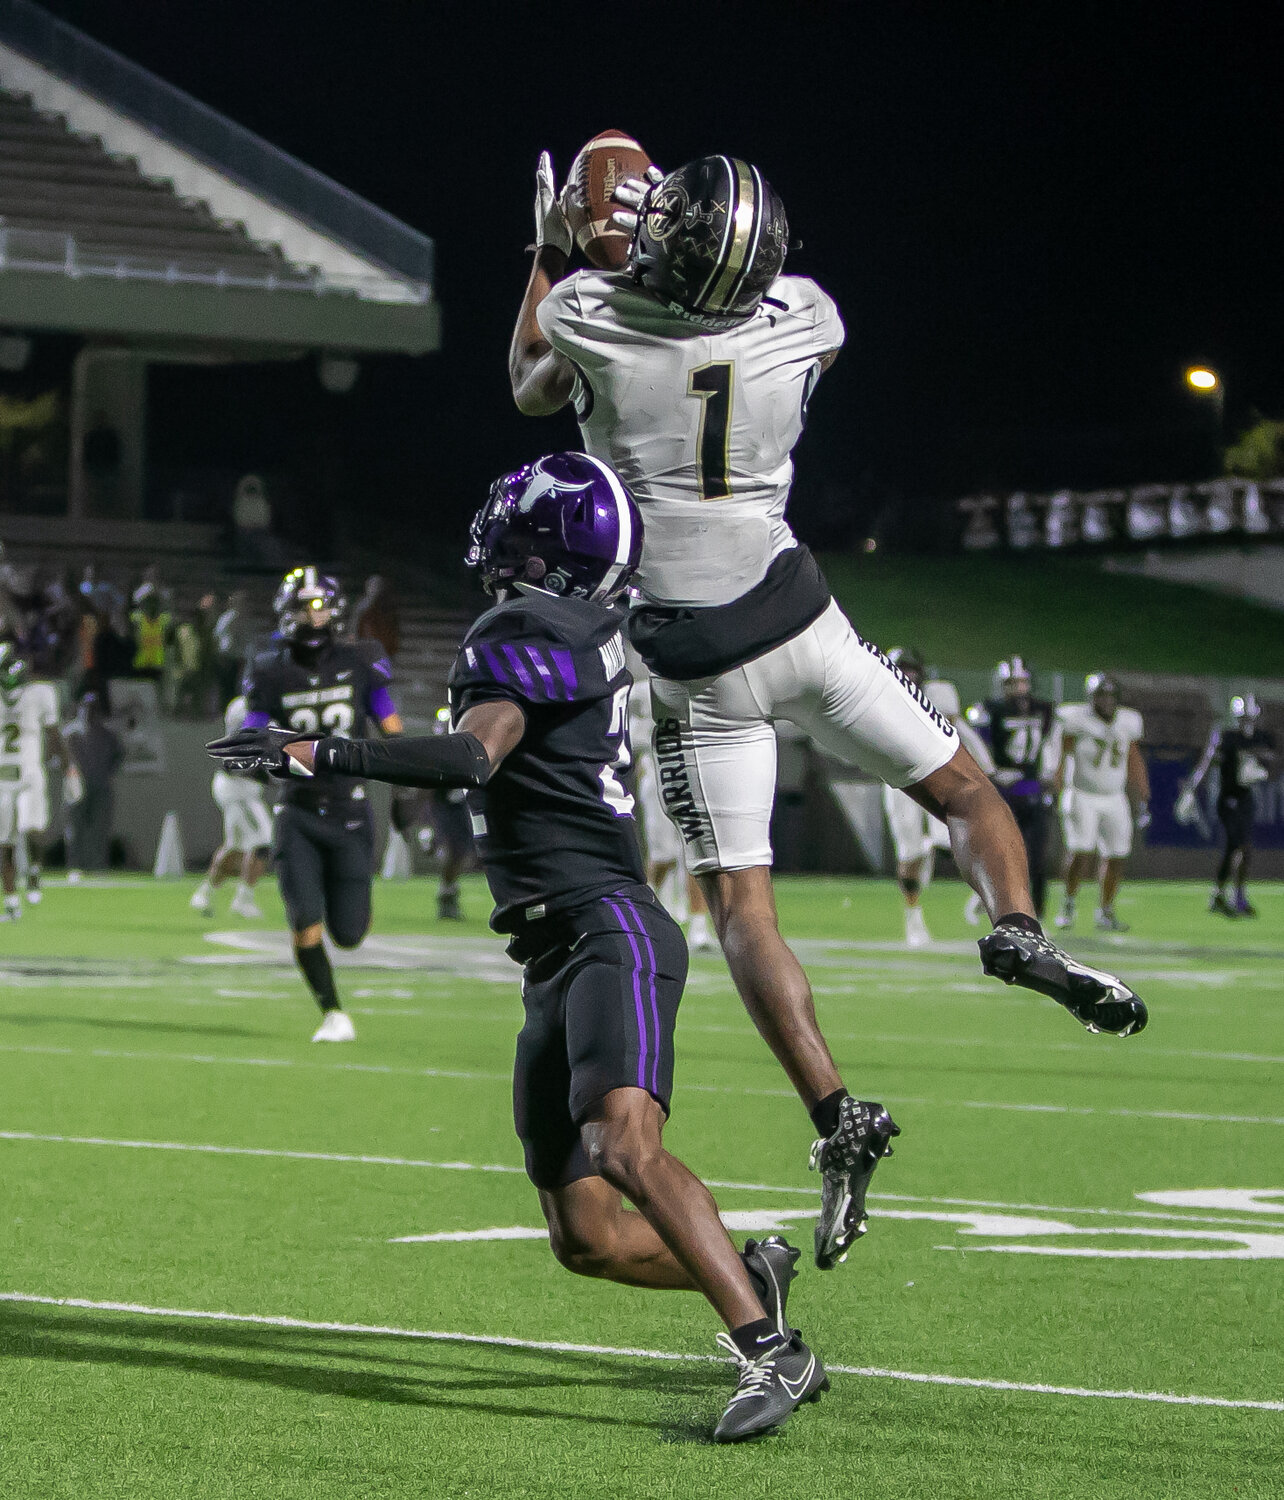 Zechariah Sample jumps to make a catch during Thursday's game between Jordan and Morton Ranch at Legacy Stadium.